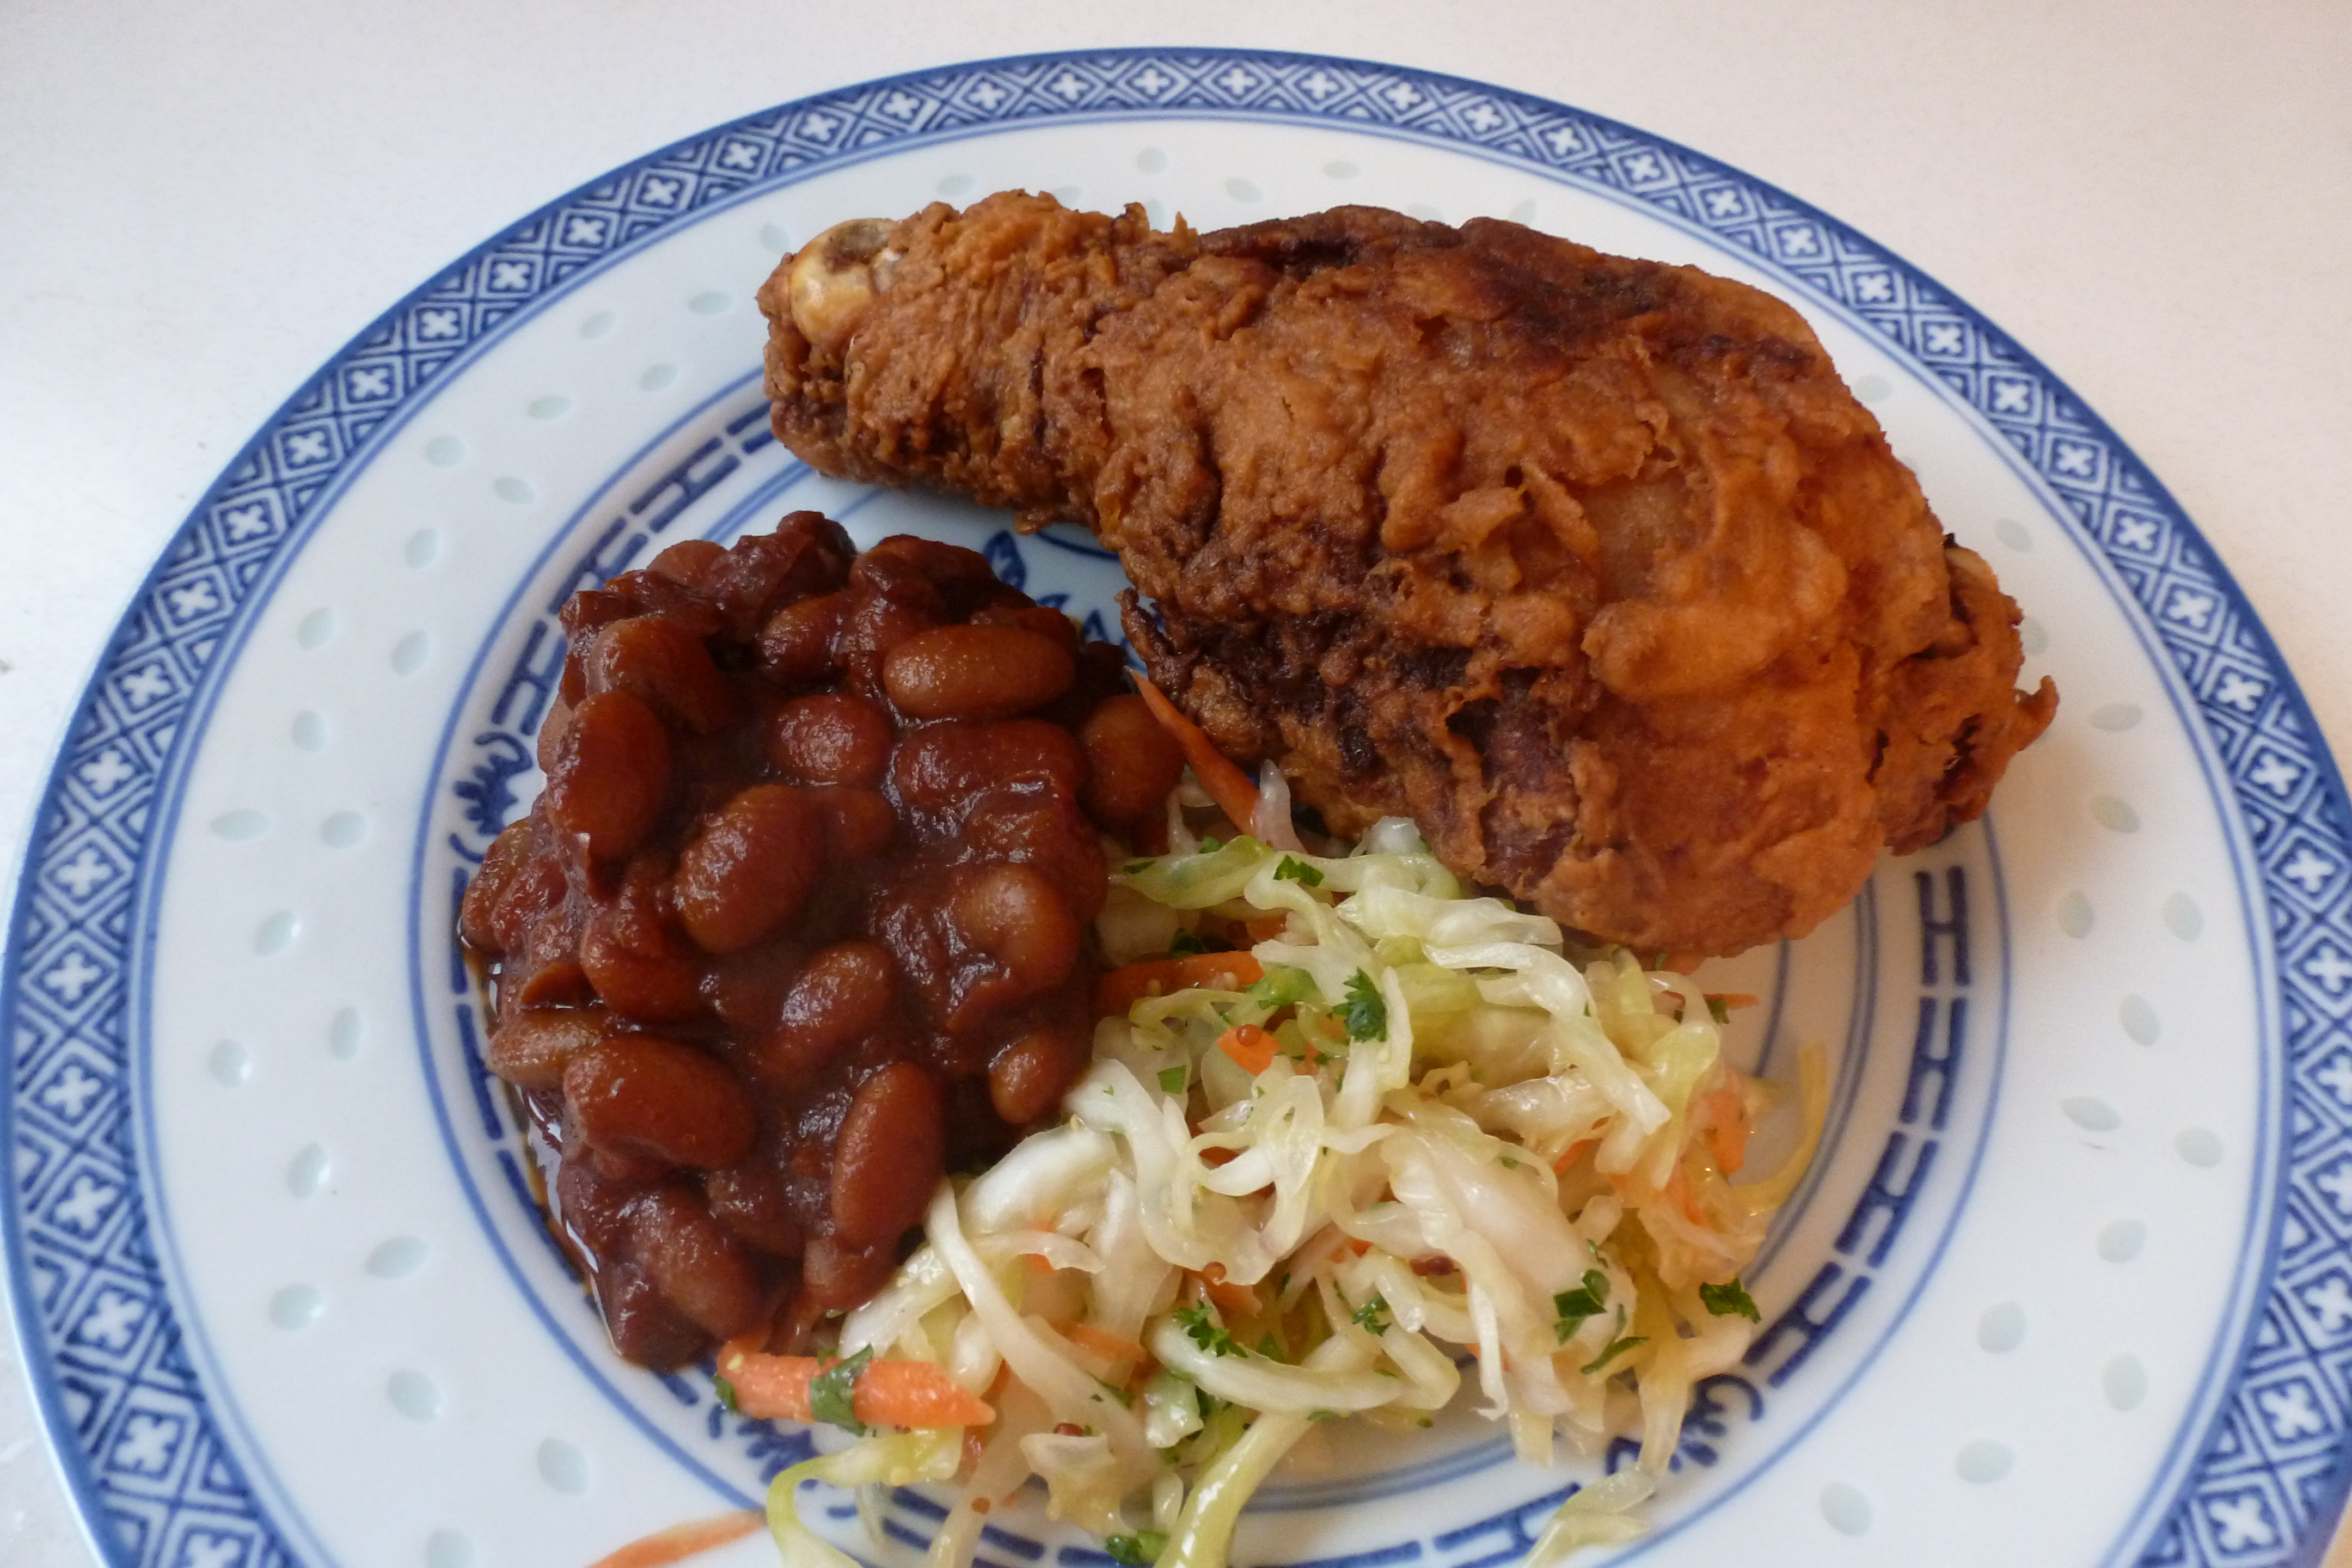 Fried chicken drumstick, brown beans, and slaw